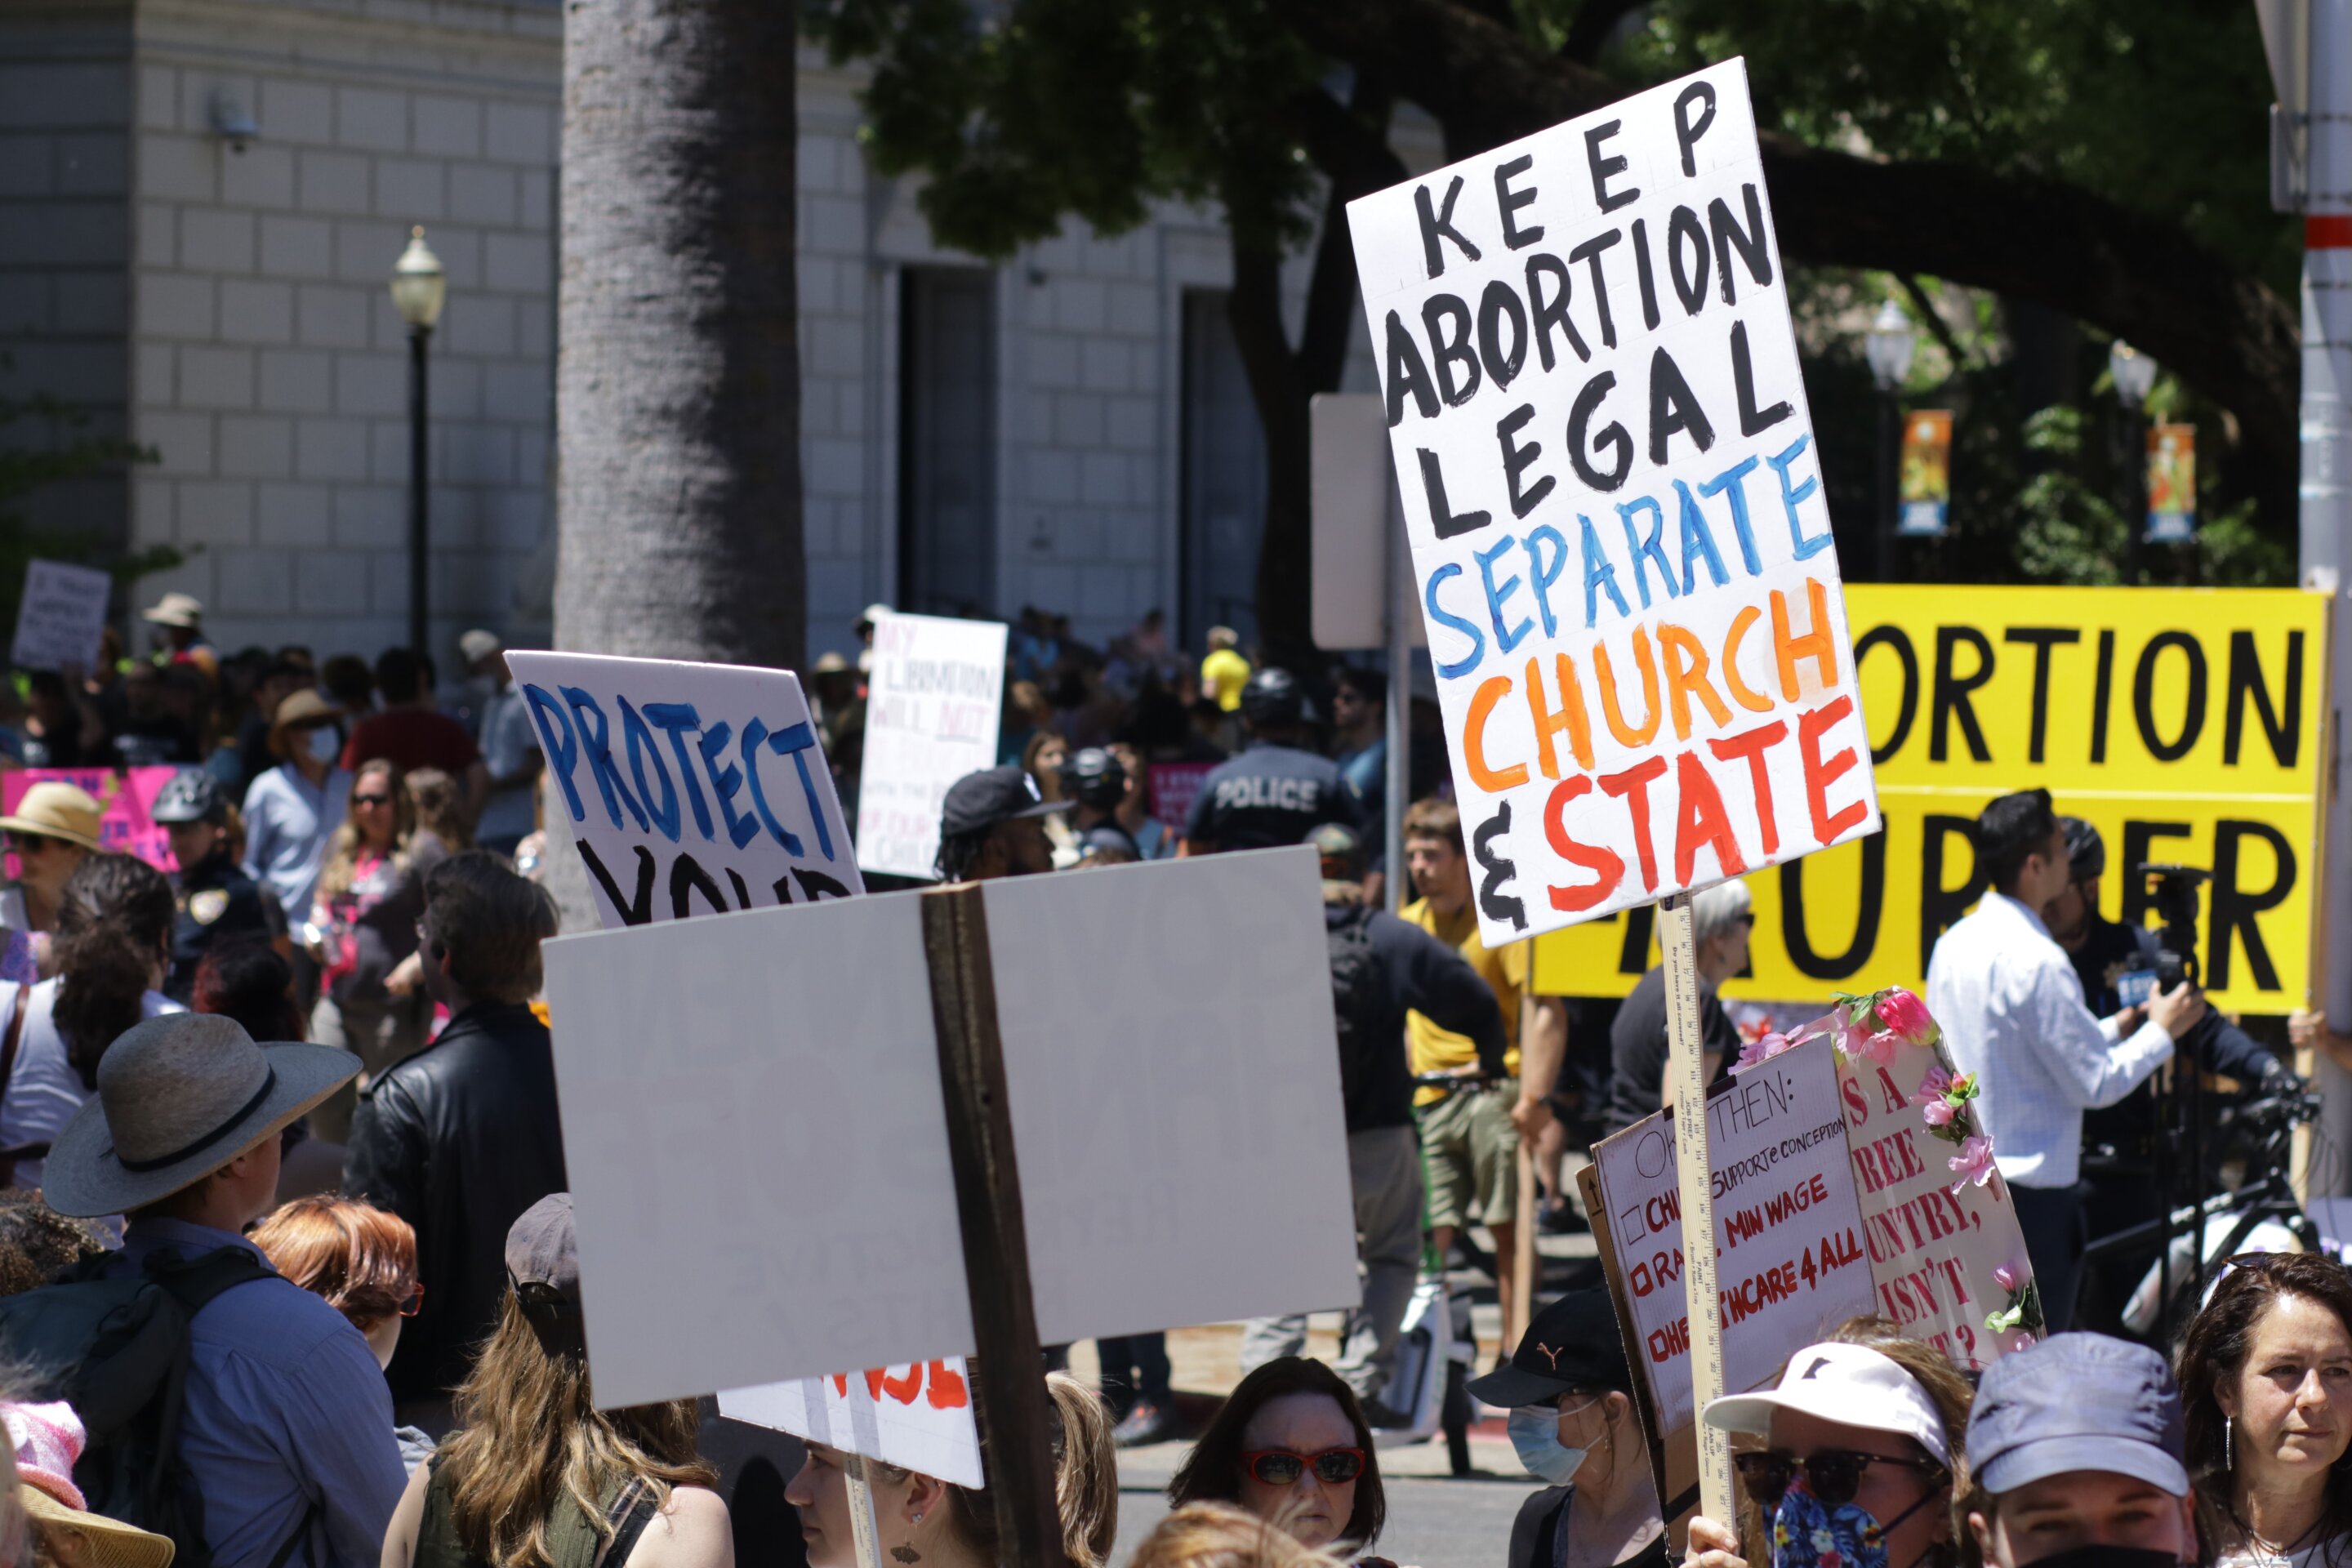 Overturning Roe v. Wade could impact how other countries view abortion rights